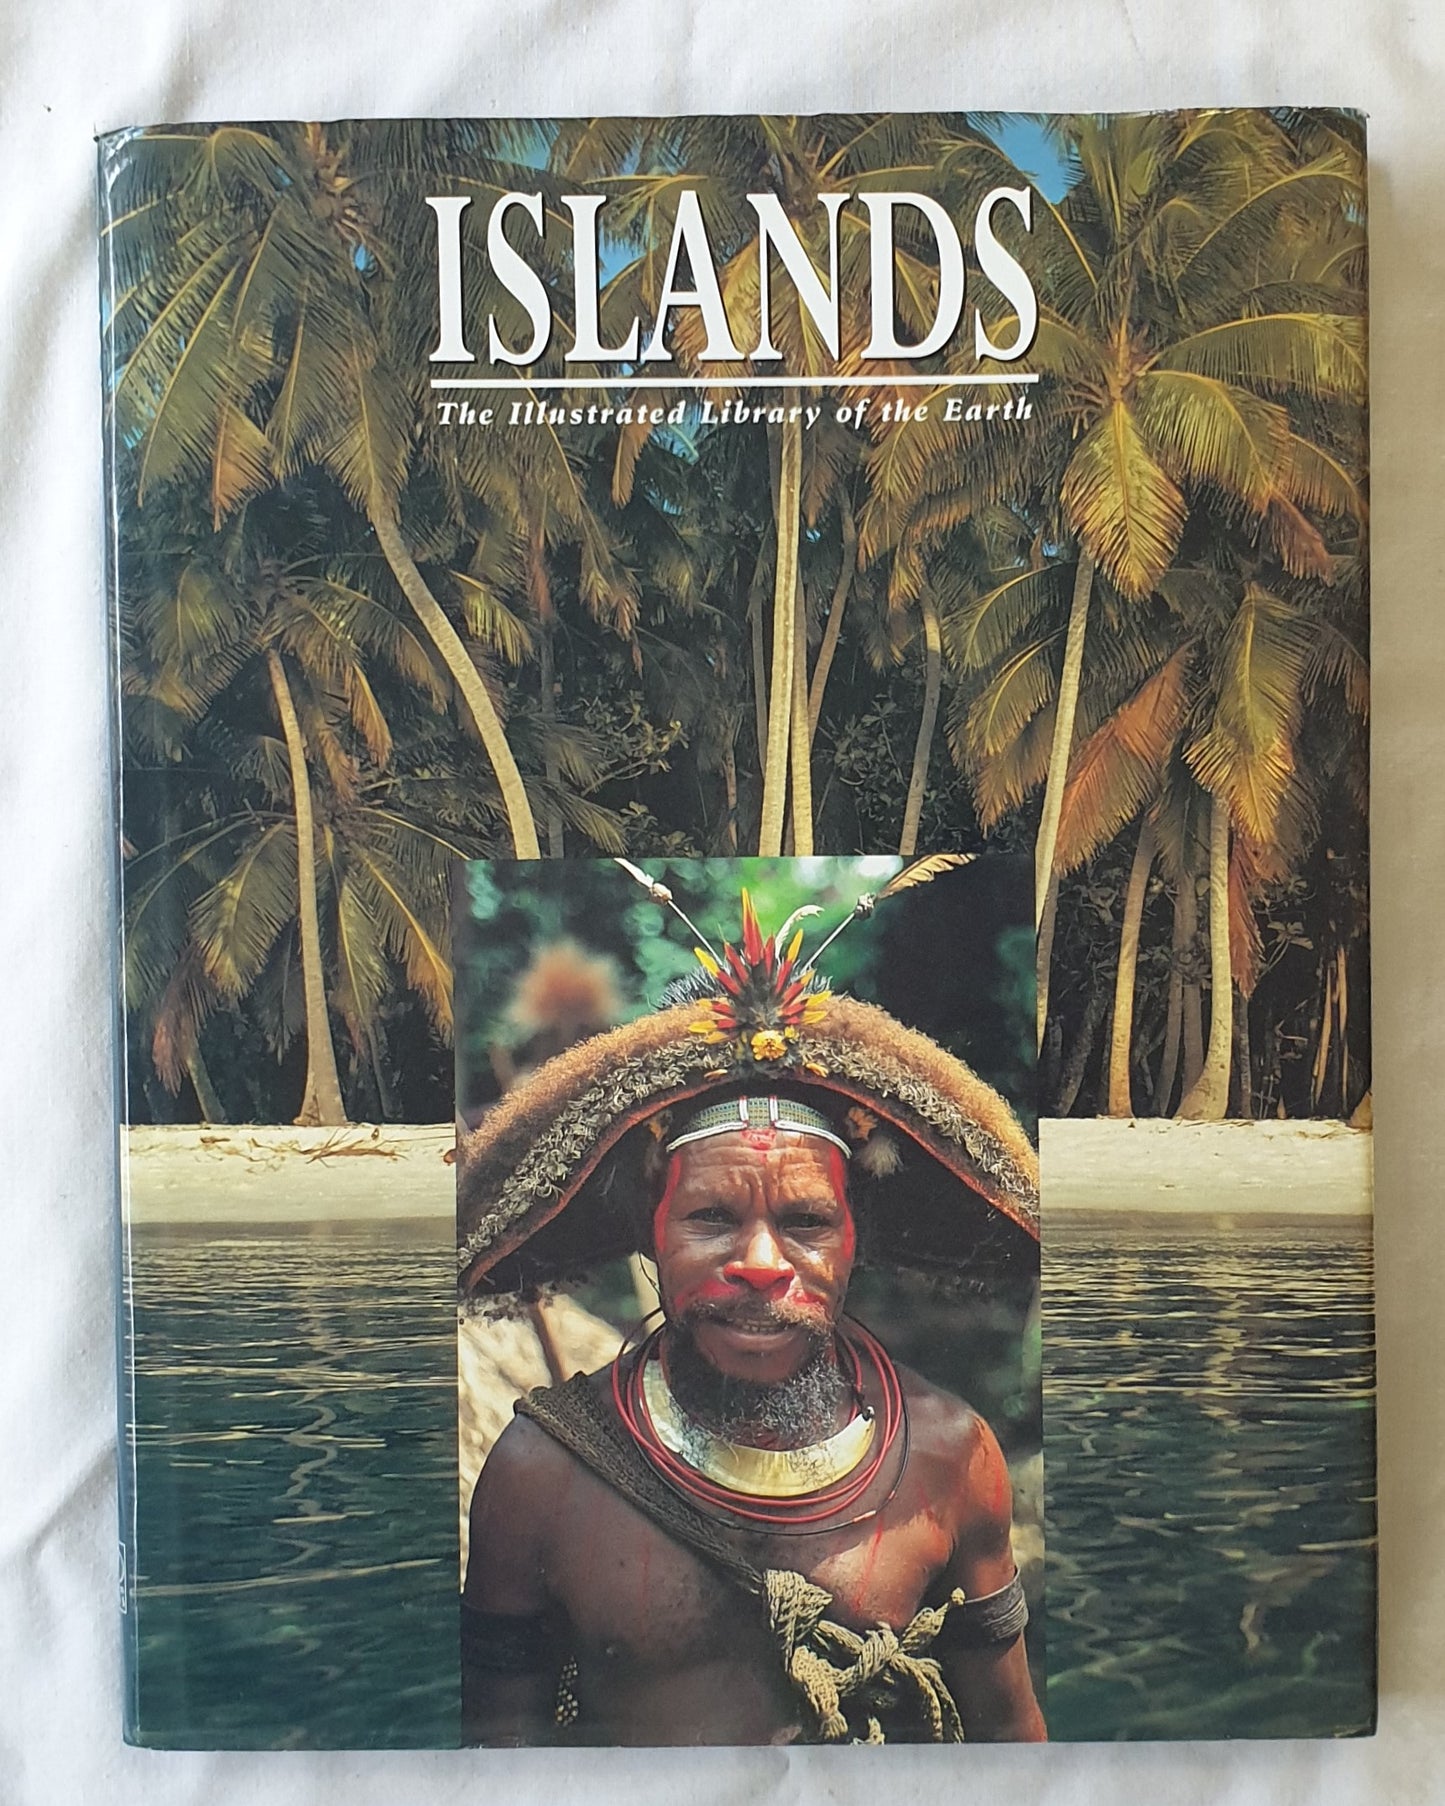 Islands  The Illustrated Library of the Earth  Edited by Robert E. Stevenson and Frank H. Talbot